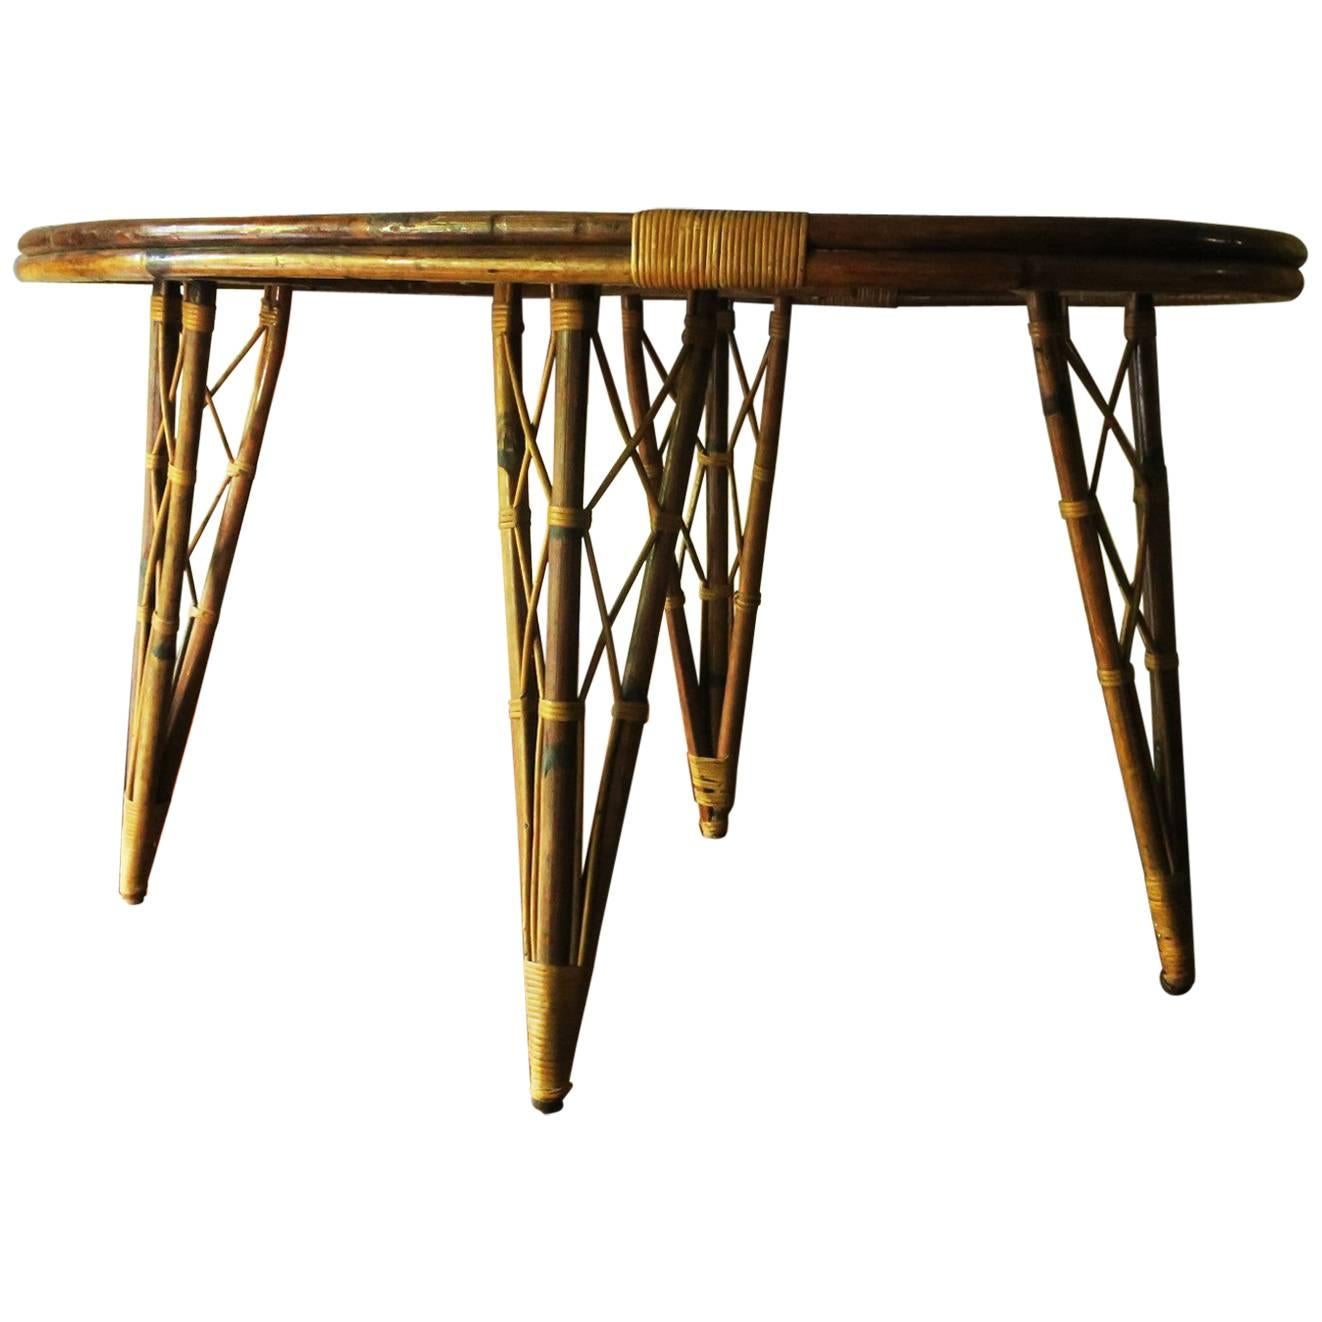 Unusual Vintage Bamboo Leaf-Shaped Side or Breakfast Table For Sale